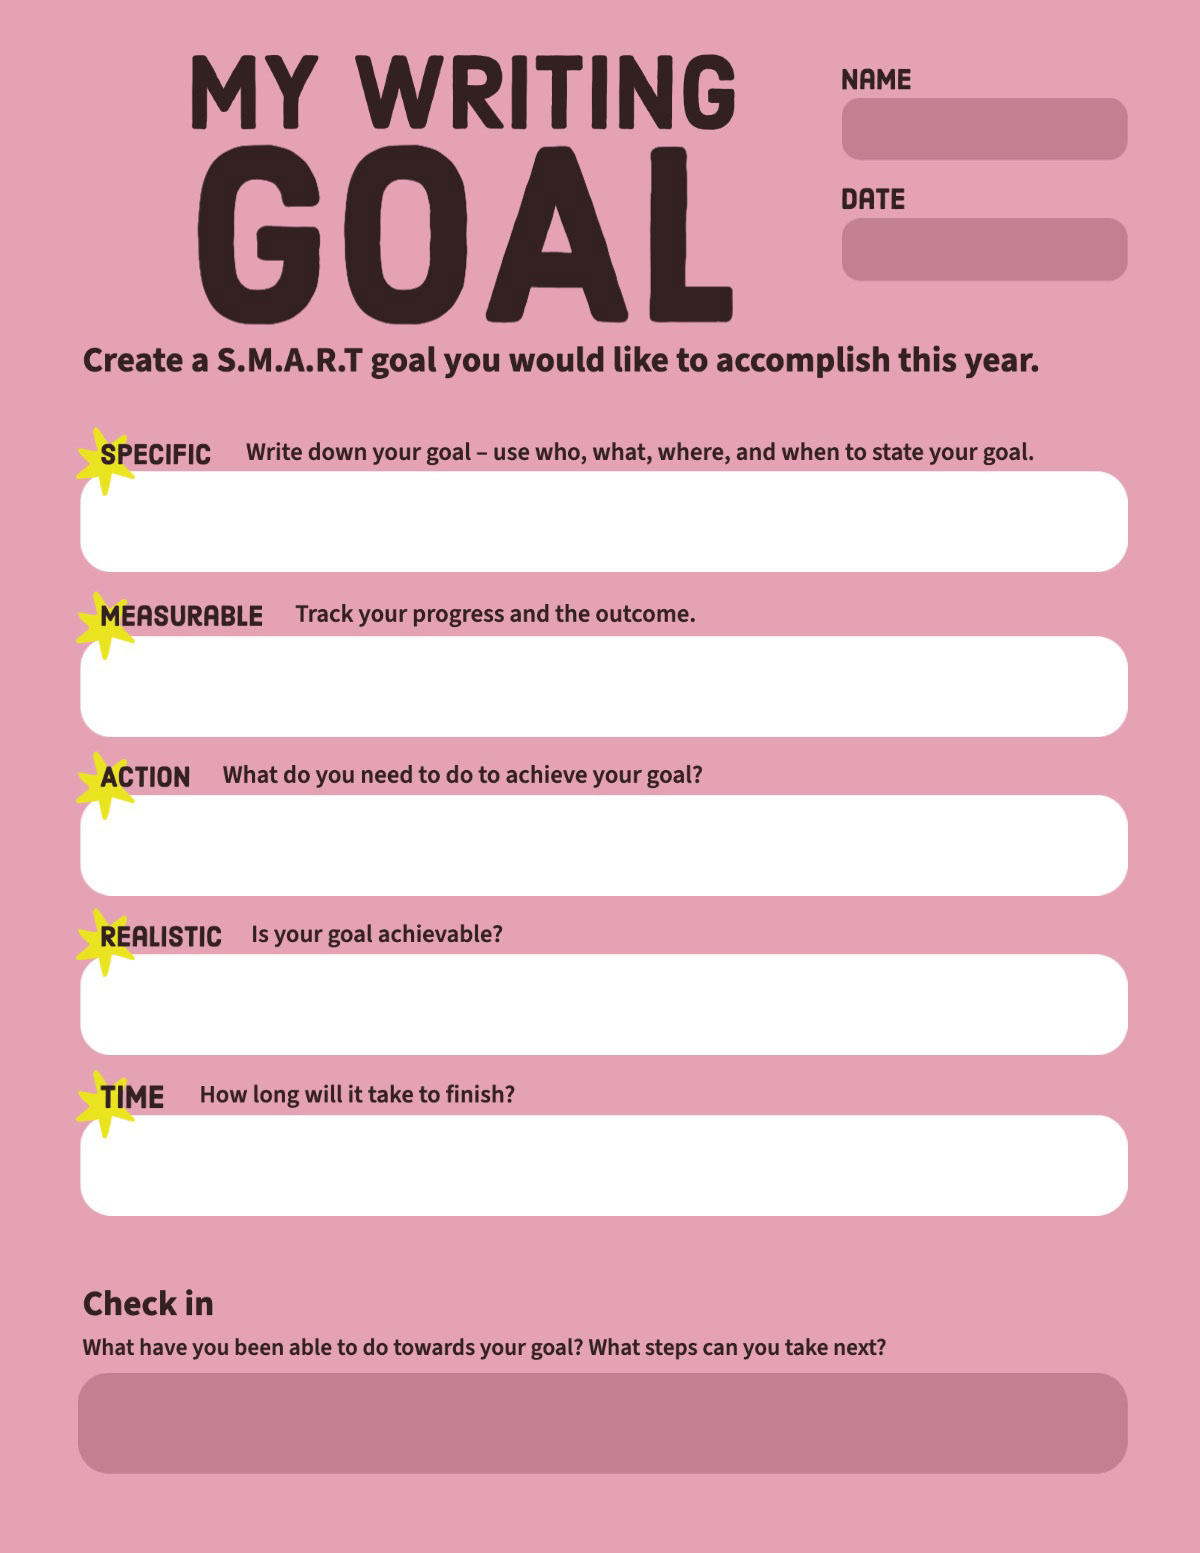 PinkSMART Elementary Middle High School Goal Setting Academic and Personal Student Worksheet My Writing Goal Time Check in Date Measurable Create a S.M.A.R.T goal you would like to accomplish this year. Action Name Specific Realistic Track your progress and the outcome. Write down your goal – use who, what, where, and when to state your goal. What do you need to do to achieve your goal? Is your goal achievable? What have you been able to do towards your goal? What steps can you take next? How long will it take to finish?